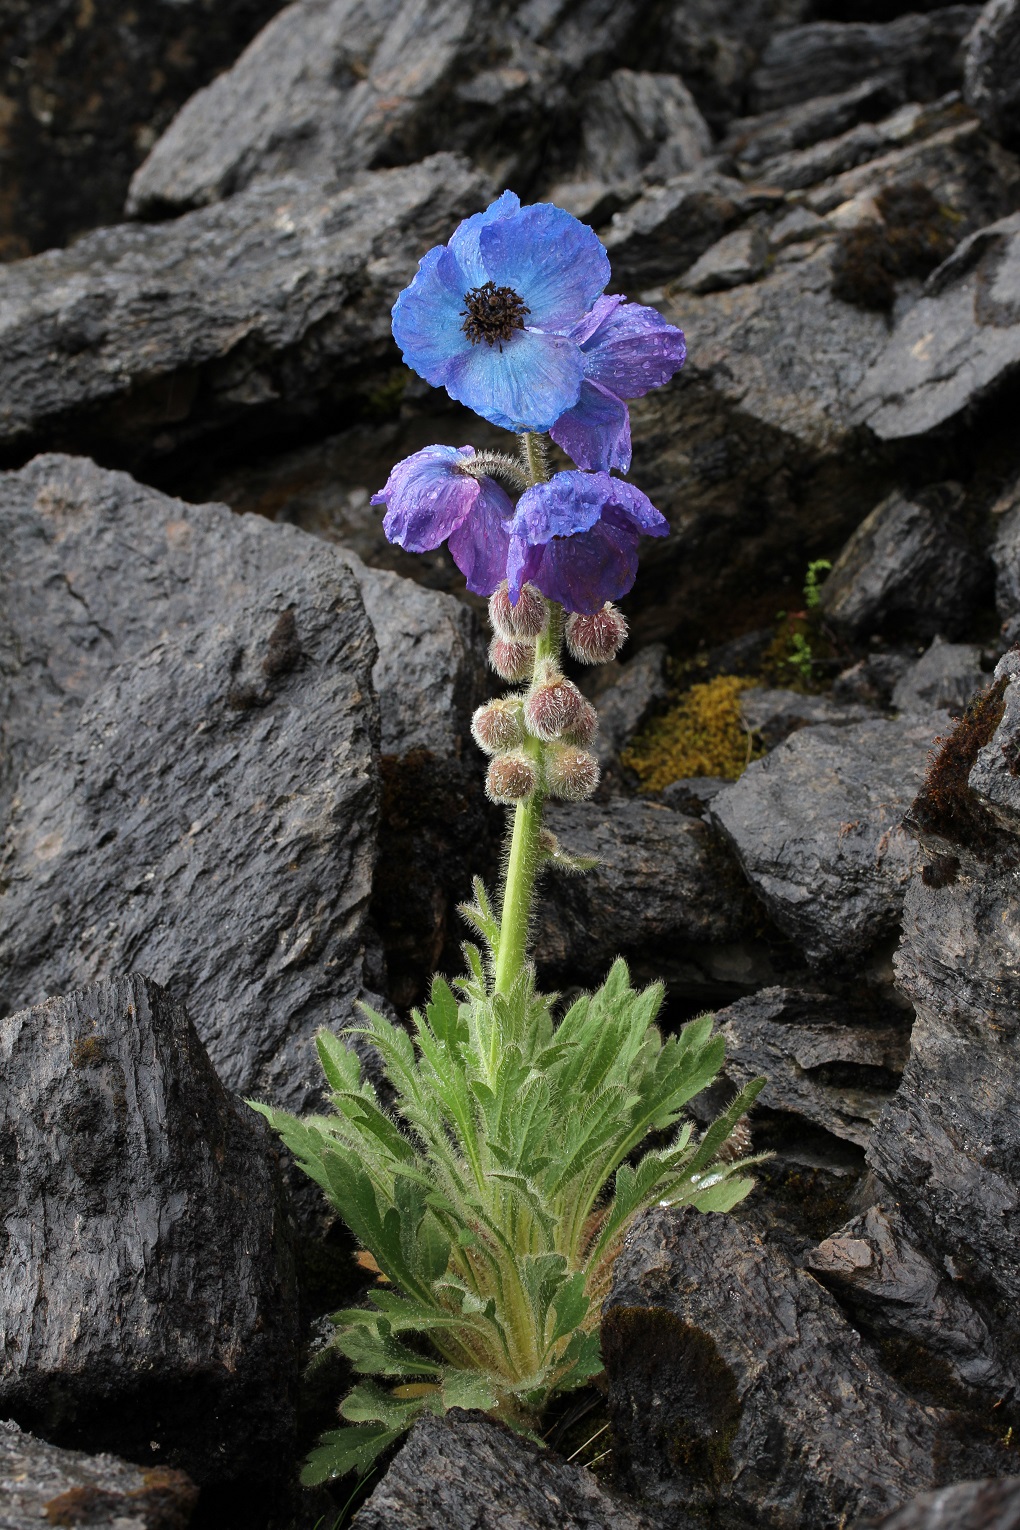 Blue Poppy is categorised as 'Critically Endangered' by the IUCN and is endemic to Jigme Dorki Wangchuck National park in north west Bhutan. 